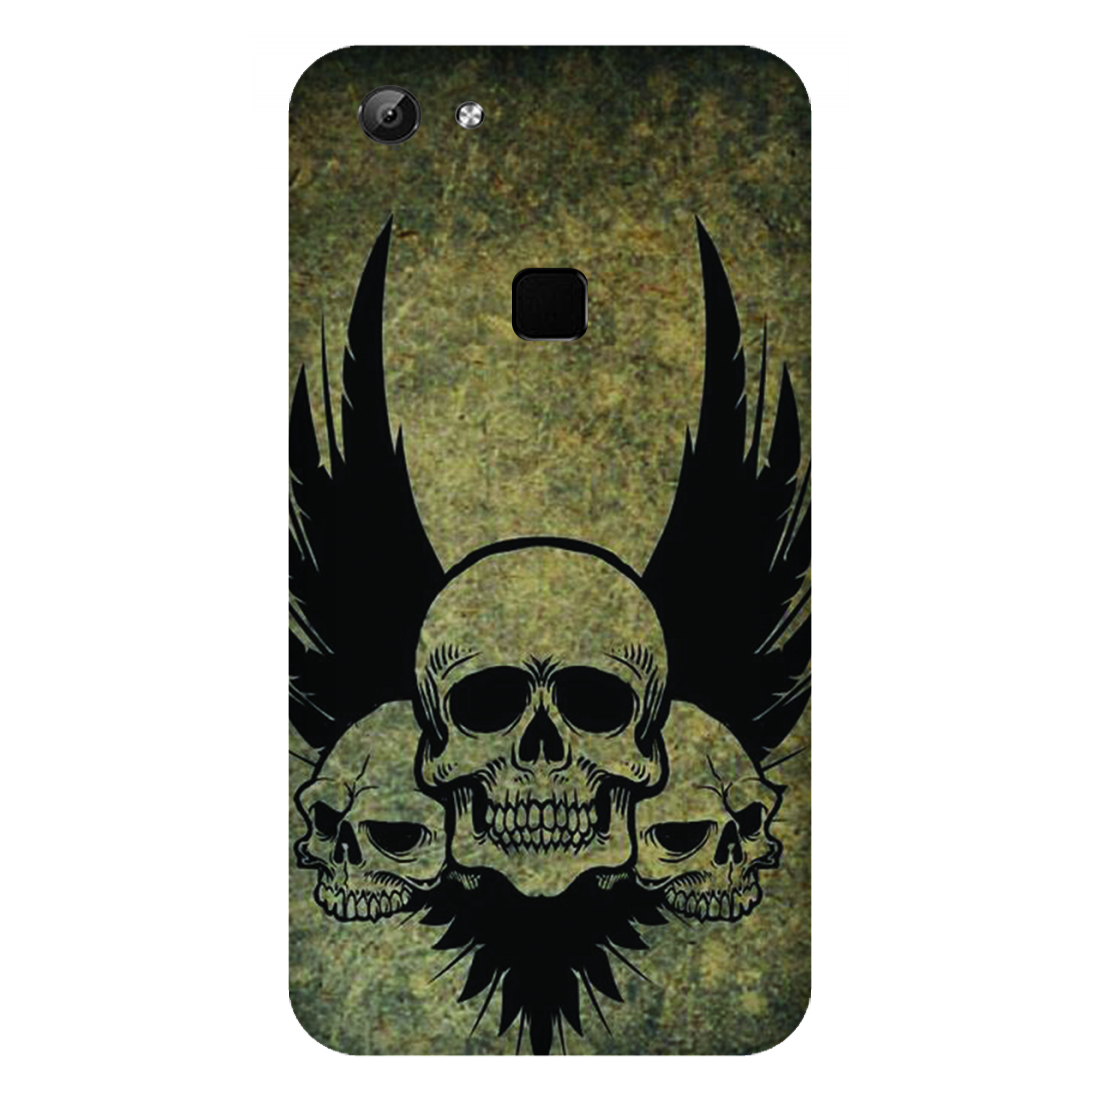 Menacing Skulls with Dark Wings on a Grungy Background Case Vivo V7